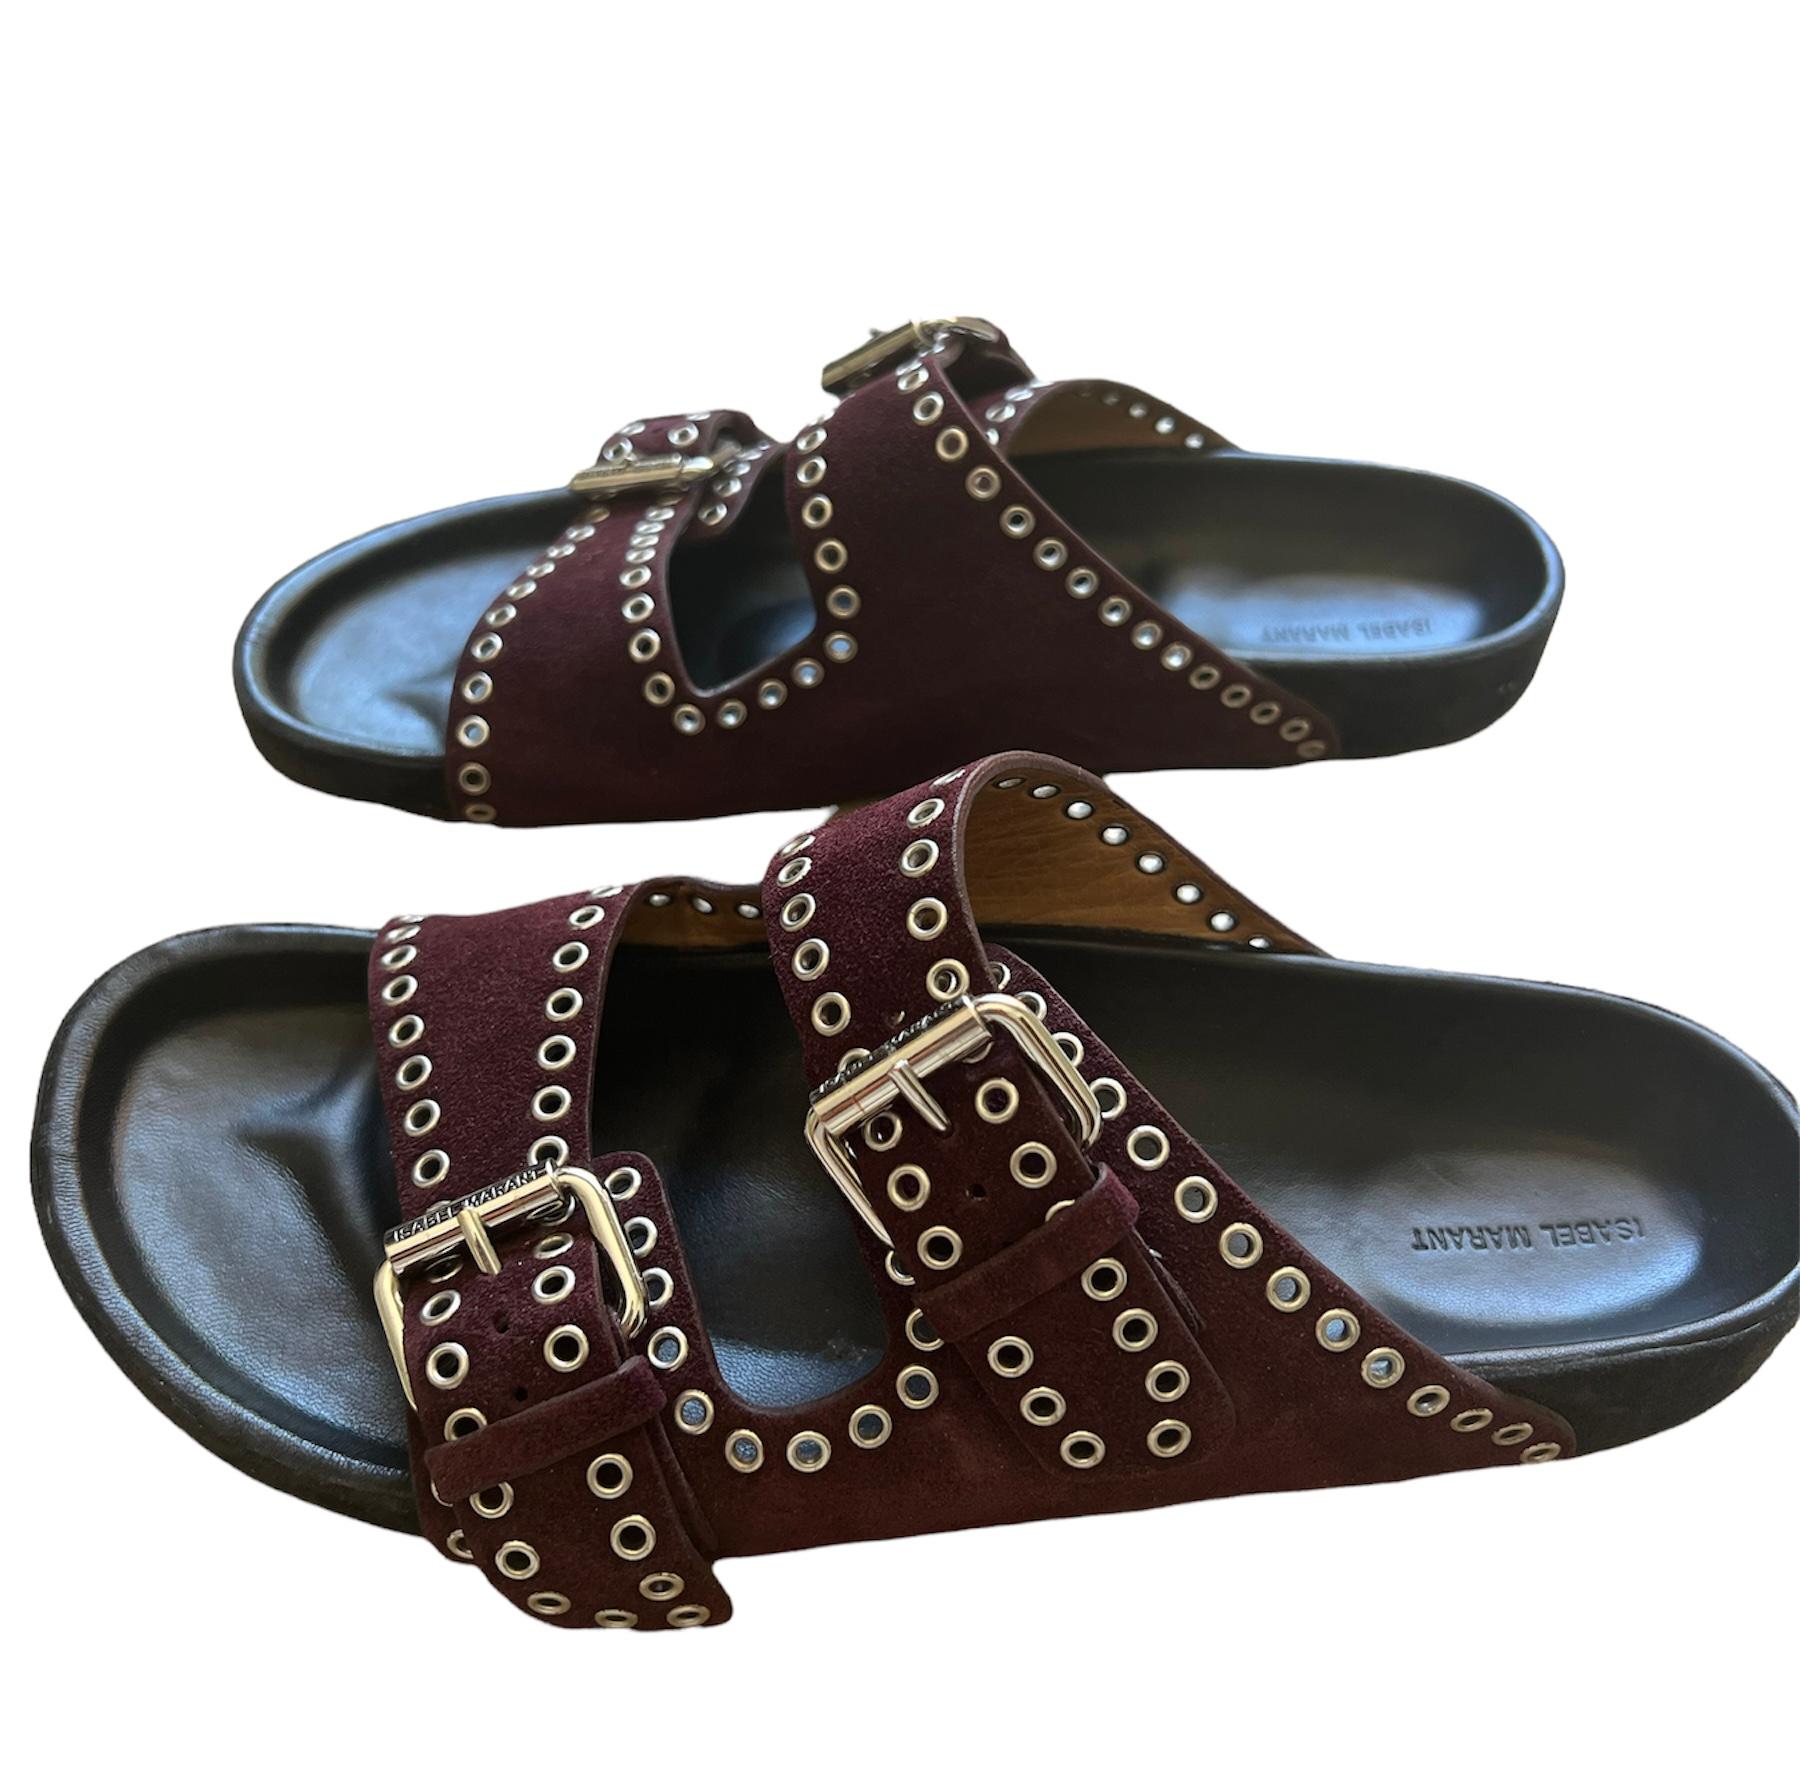 A pair of Isabel Marant Lennyo suede slides in burgundy.

​The sandals are generously dotted with the eyelets that appear oftenon Isabel Marant accessories. These polished grommets embellish smooth burgundy suede and add a rebel touch to the